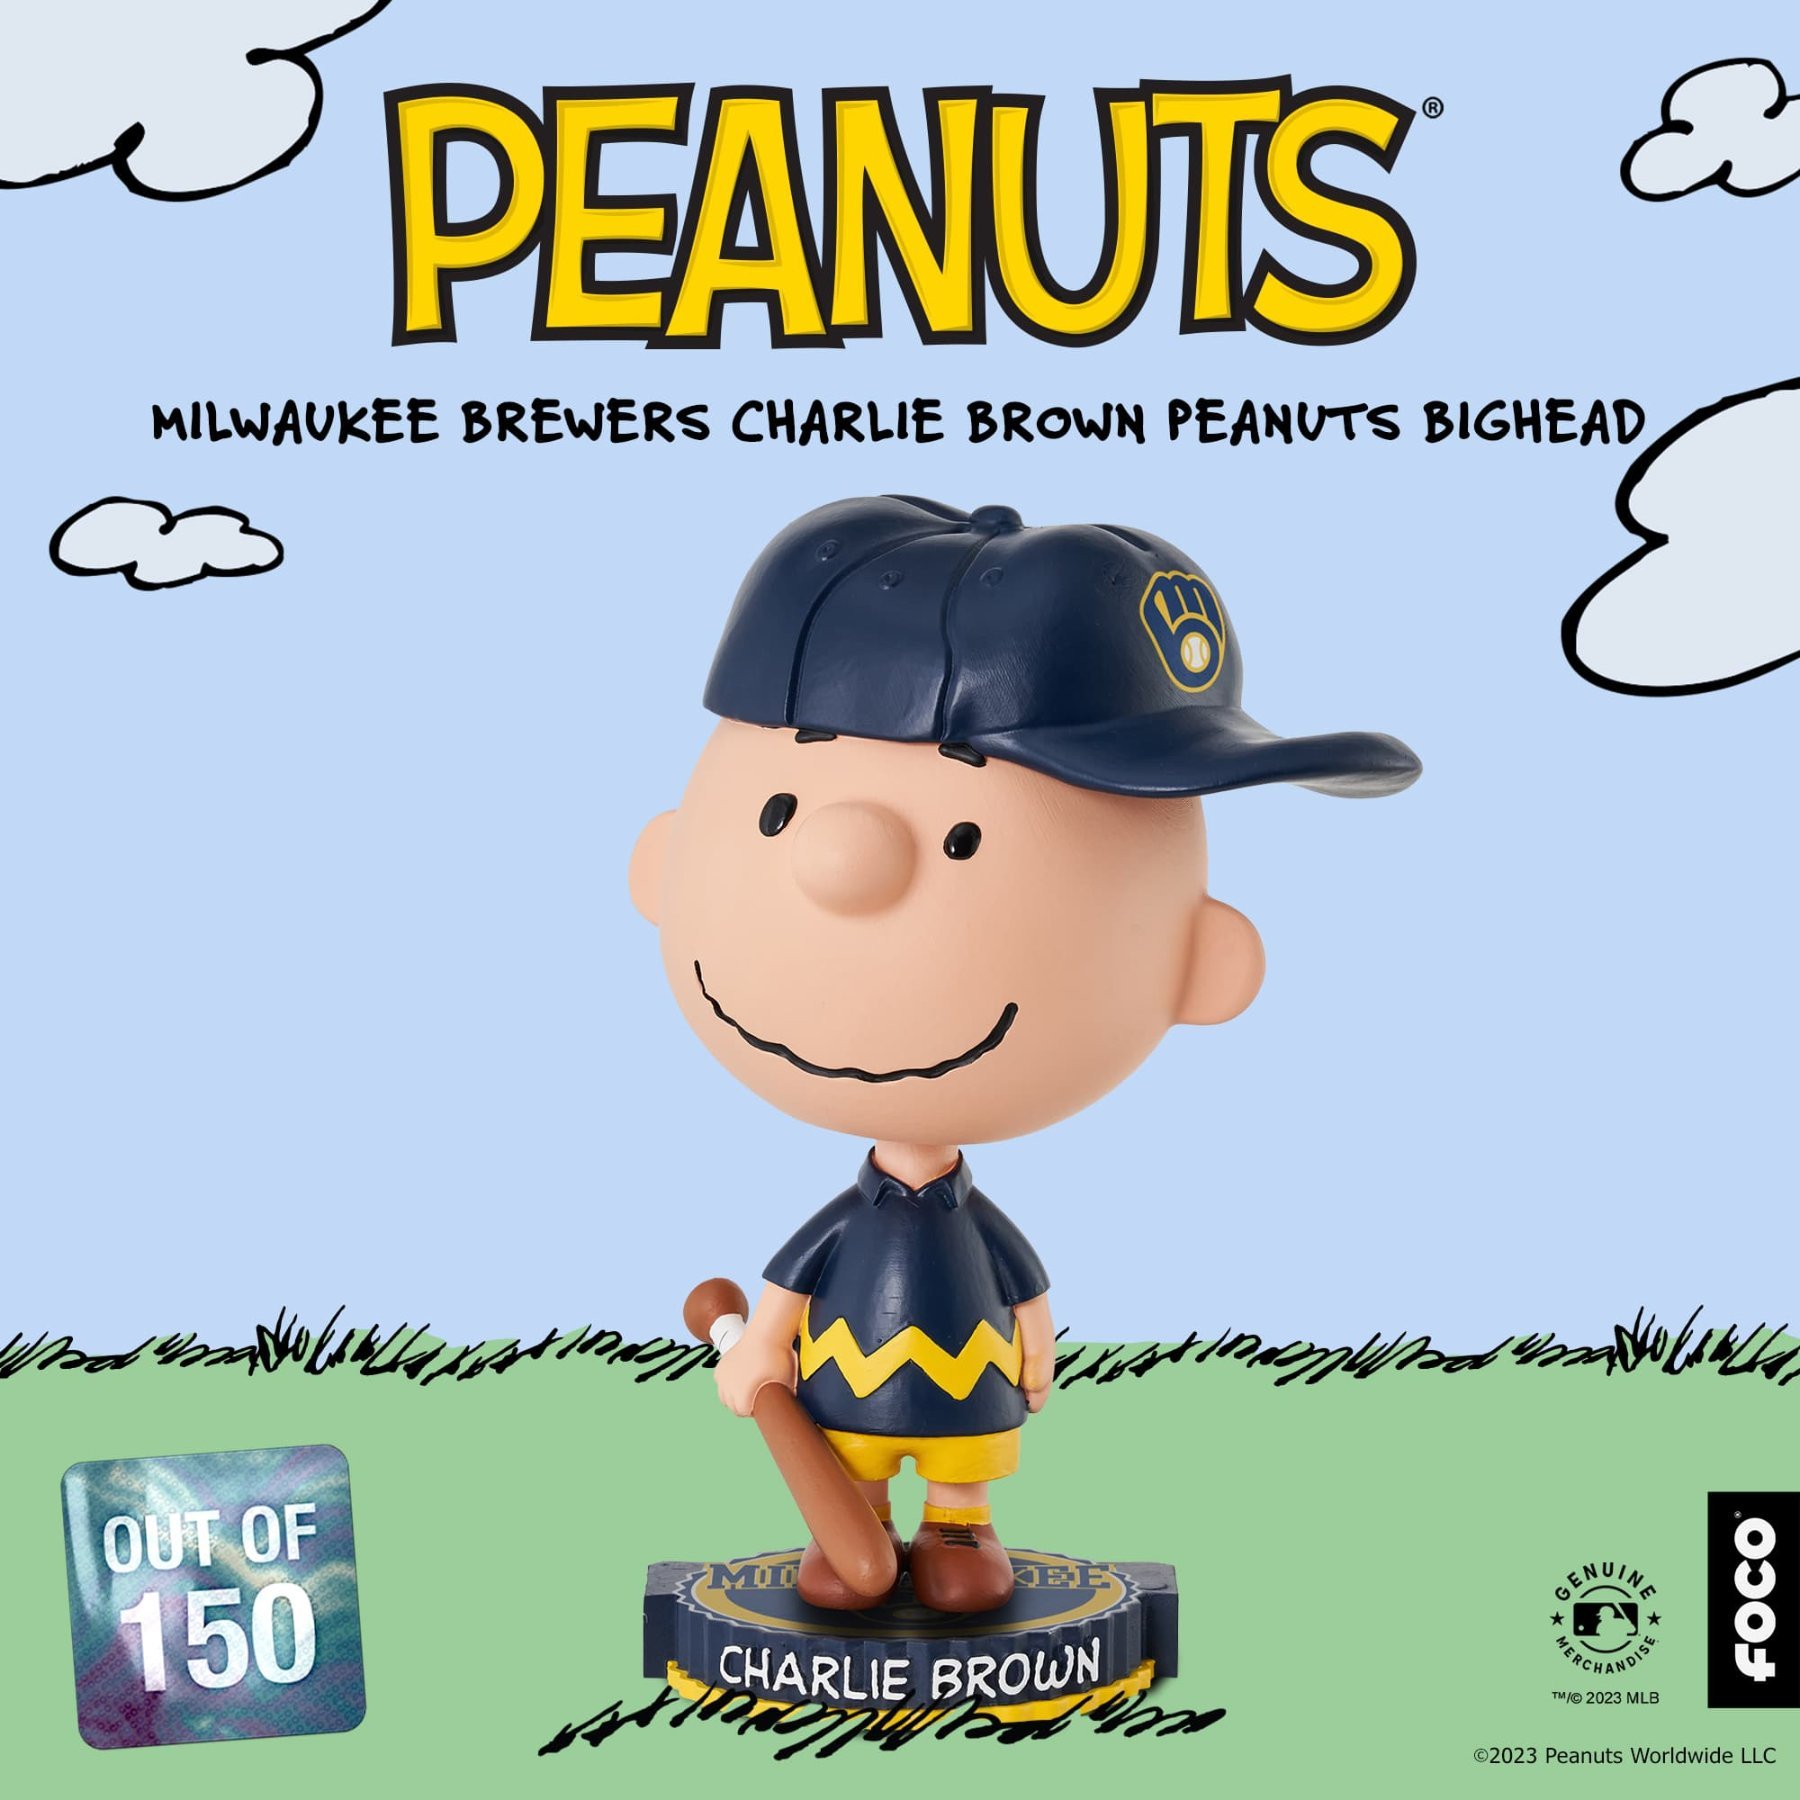 Here's the schedule of promos and bobbleheads for the 2023 Brewers